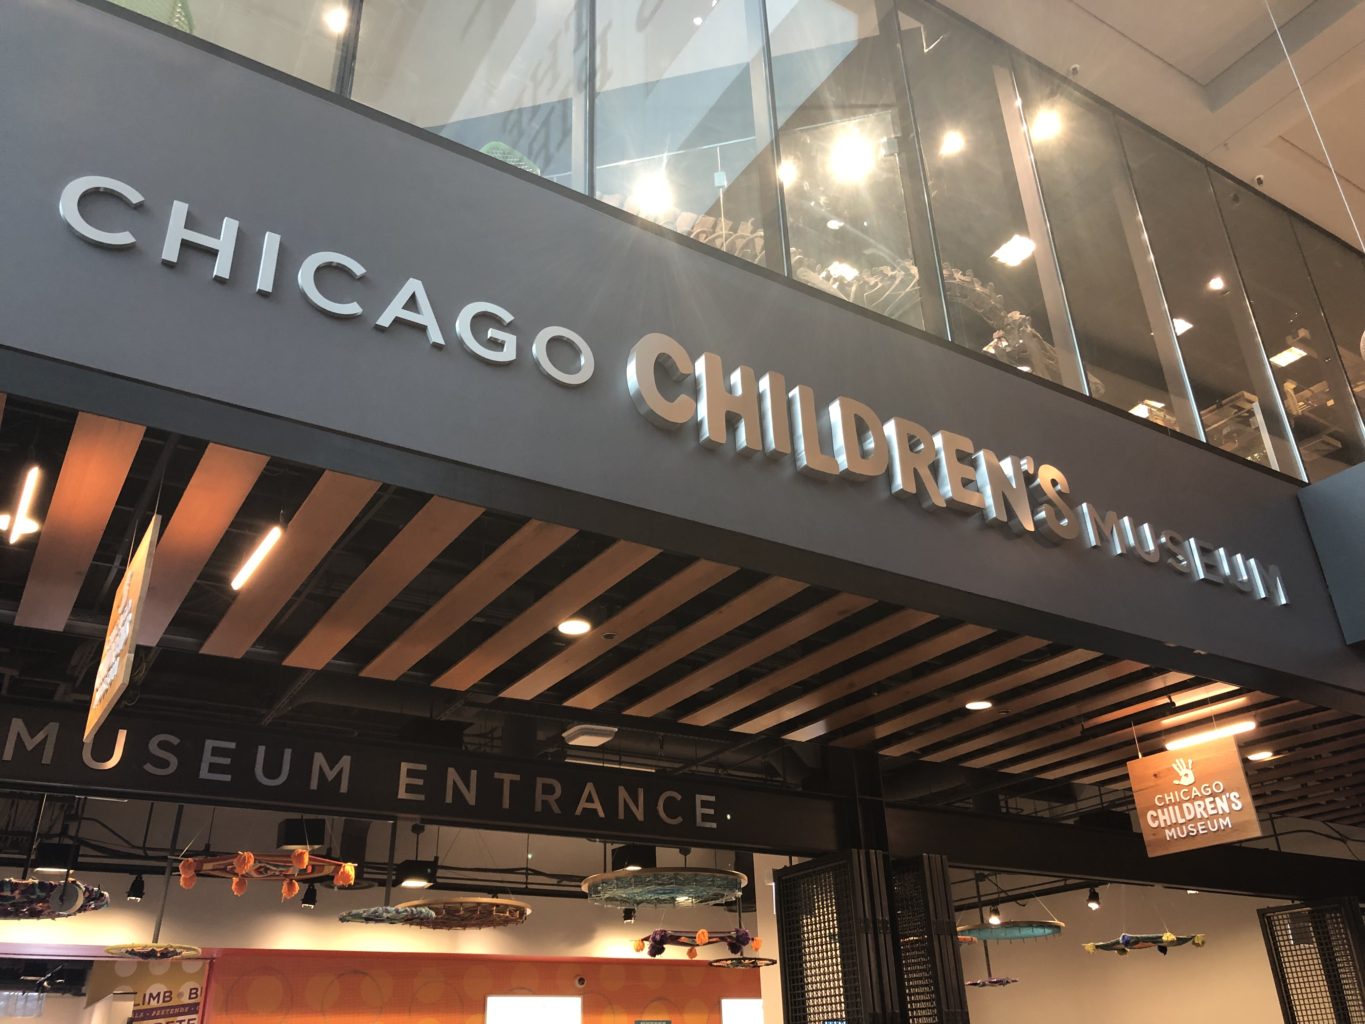 Family Field Trip: Chicago Children's Museum at Navy Pier | A parent's guide to exploring Chicago's highlights | Tips for making the most of your visit #chicago #navypier #travelwithkids #kidactivities